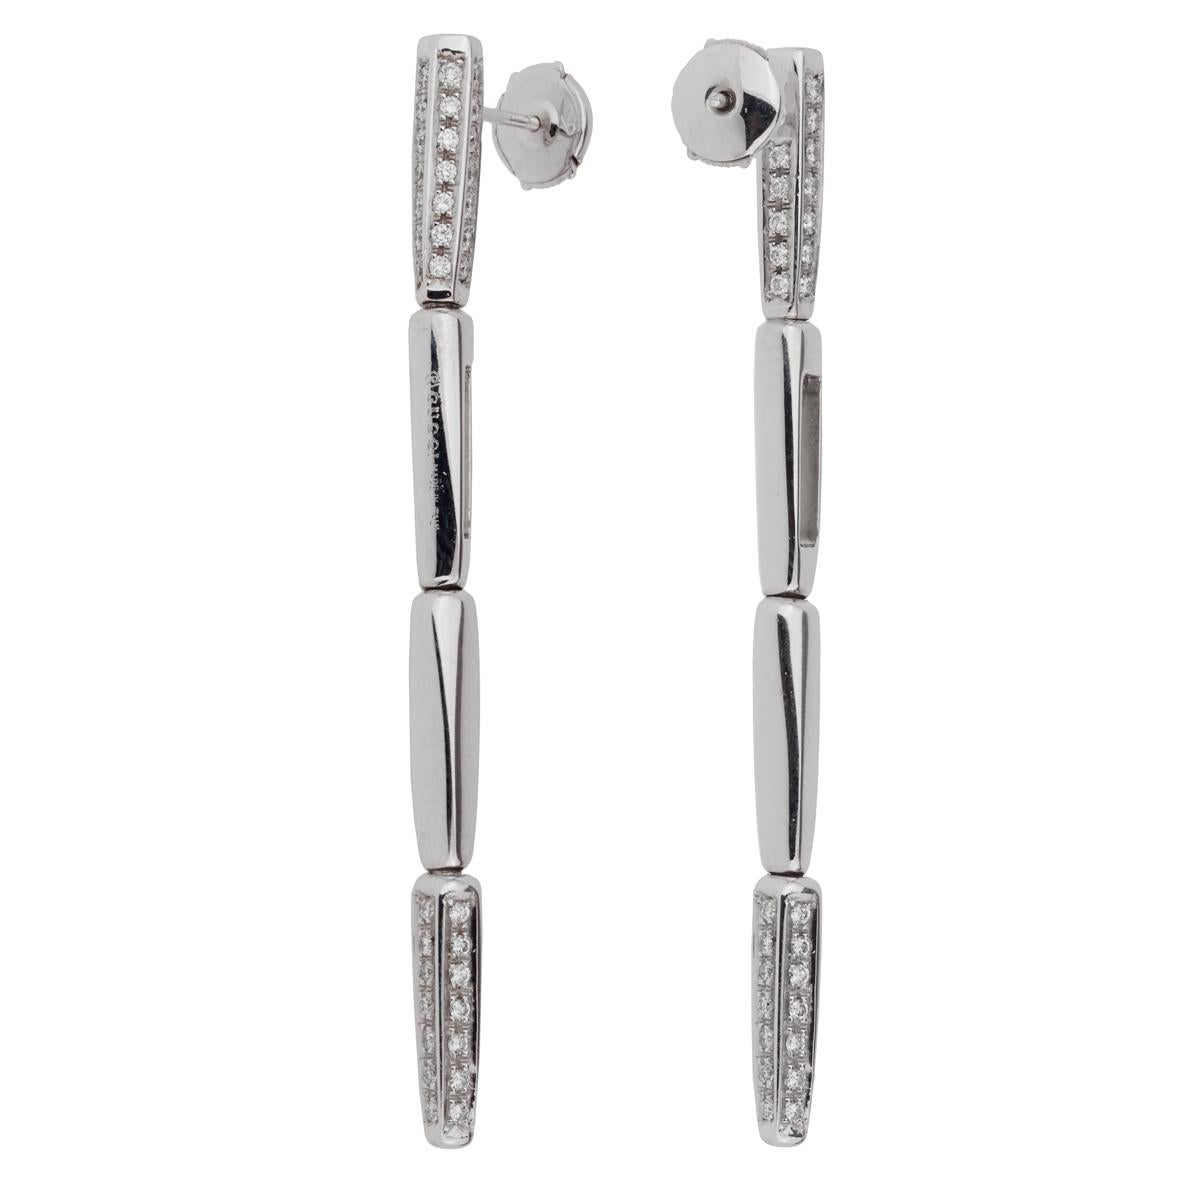 A sleek pair of Gucci earrings featuring 136 round brilliant cut diamonds set in 18k white gold. The earrings mreasure .15